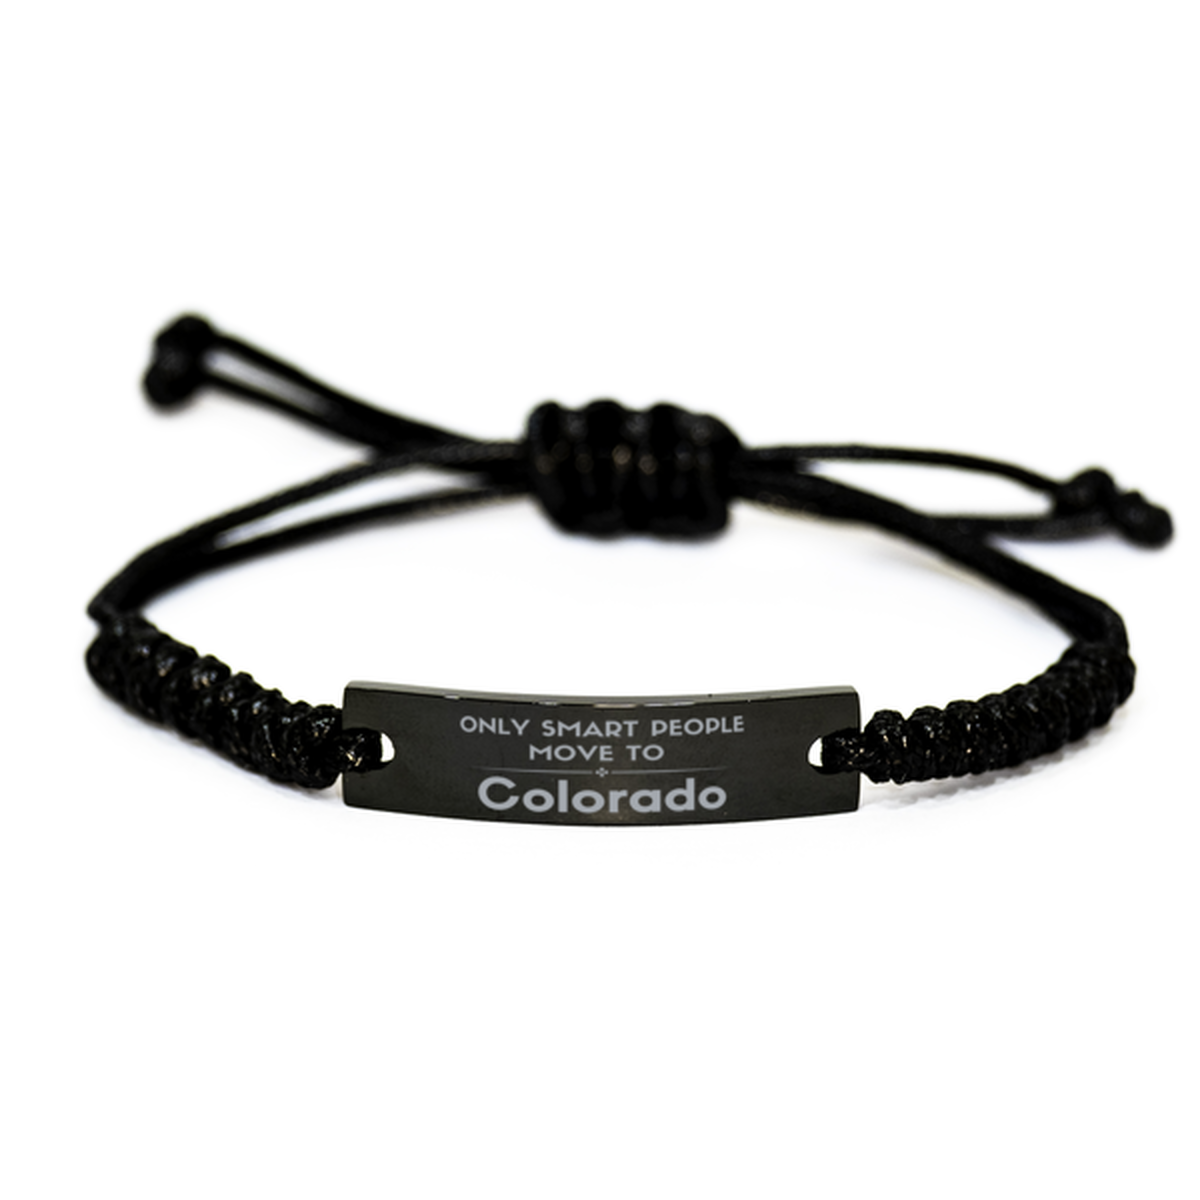 Only smart people move to Colorado Black Rope Bracelet, Gag Gifts For Colorado, Move to Colorado Gifts for Friends Coworker Funny Saying Quote